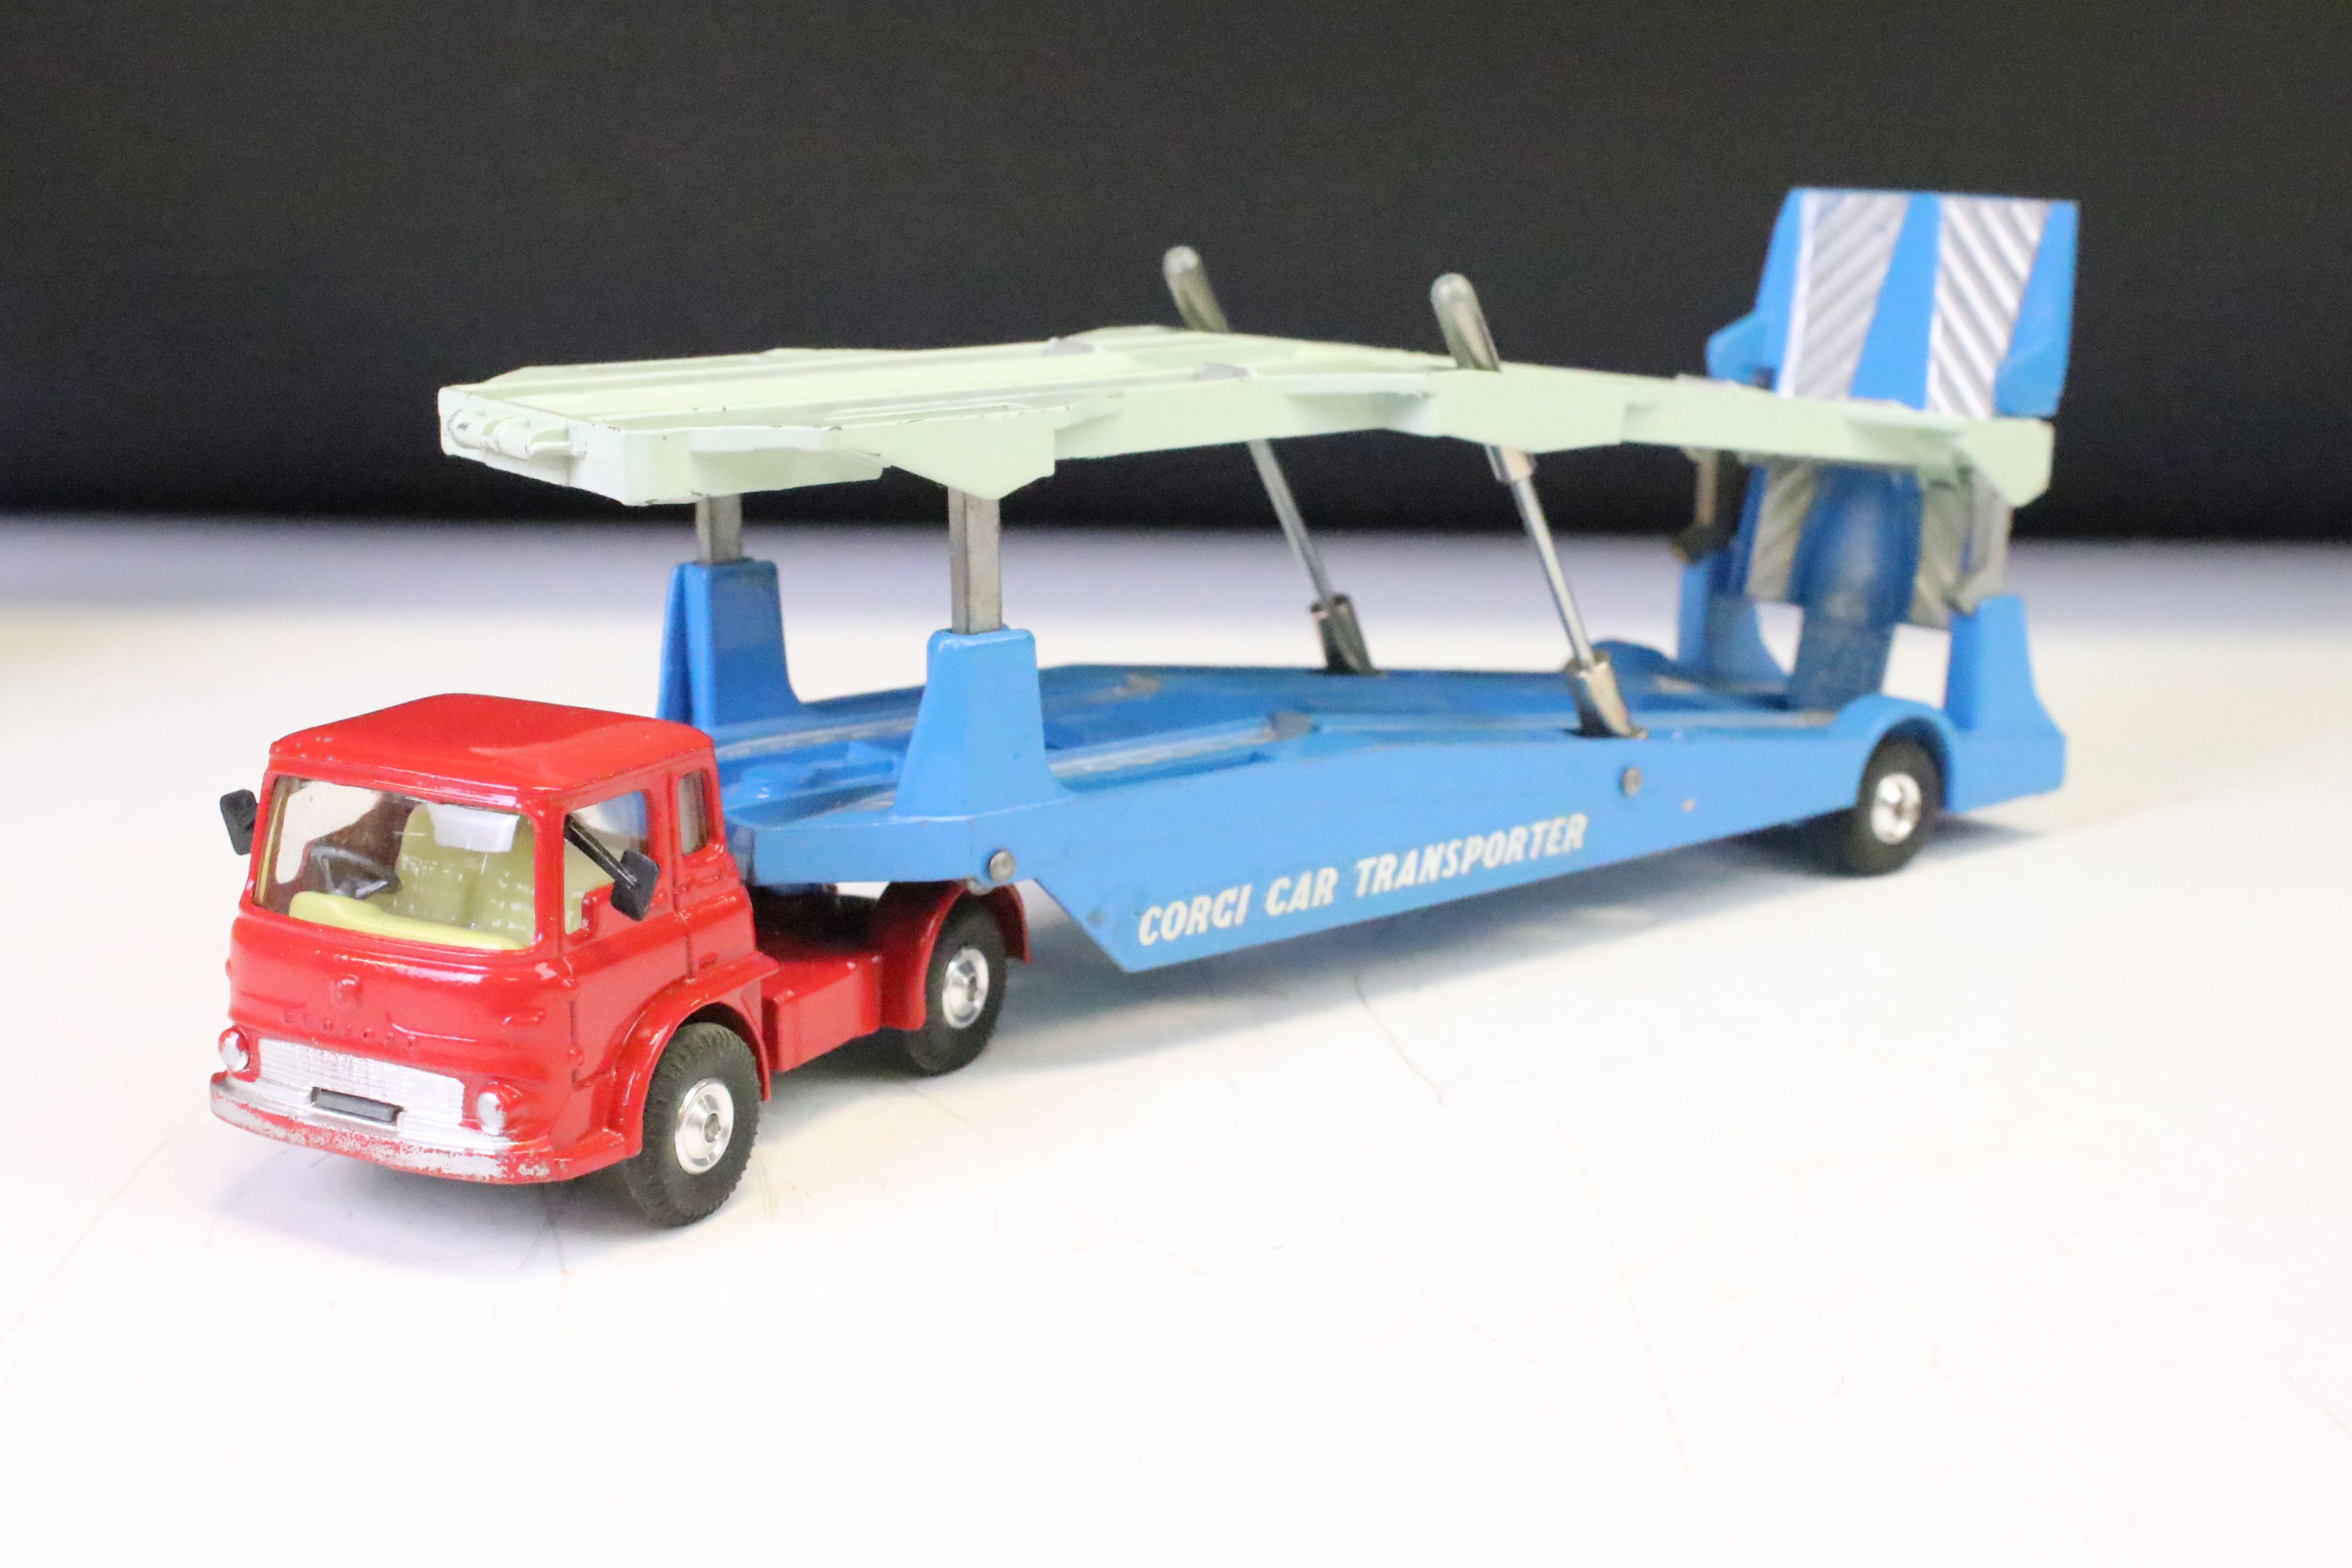 Boxed Corgi Major 1105 "Carrimore" Car Transporter with "Bedford" Tractor Unit, with operating - Image 2 of 5